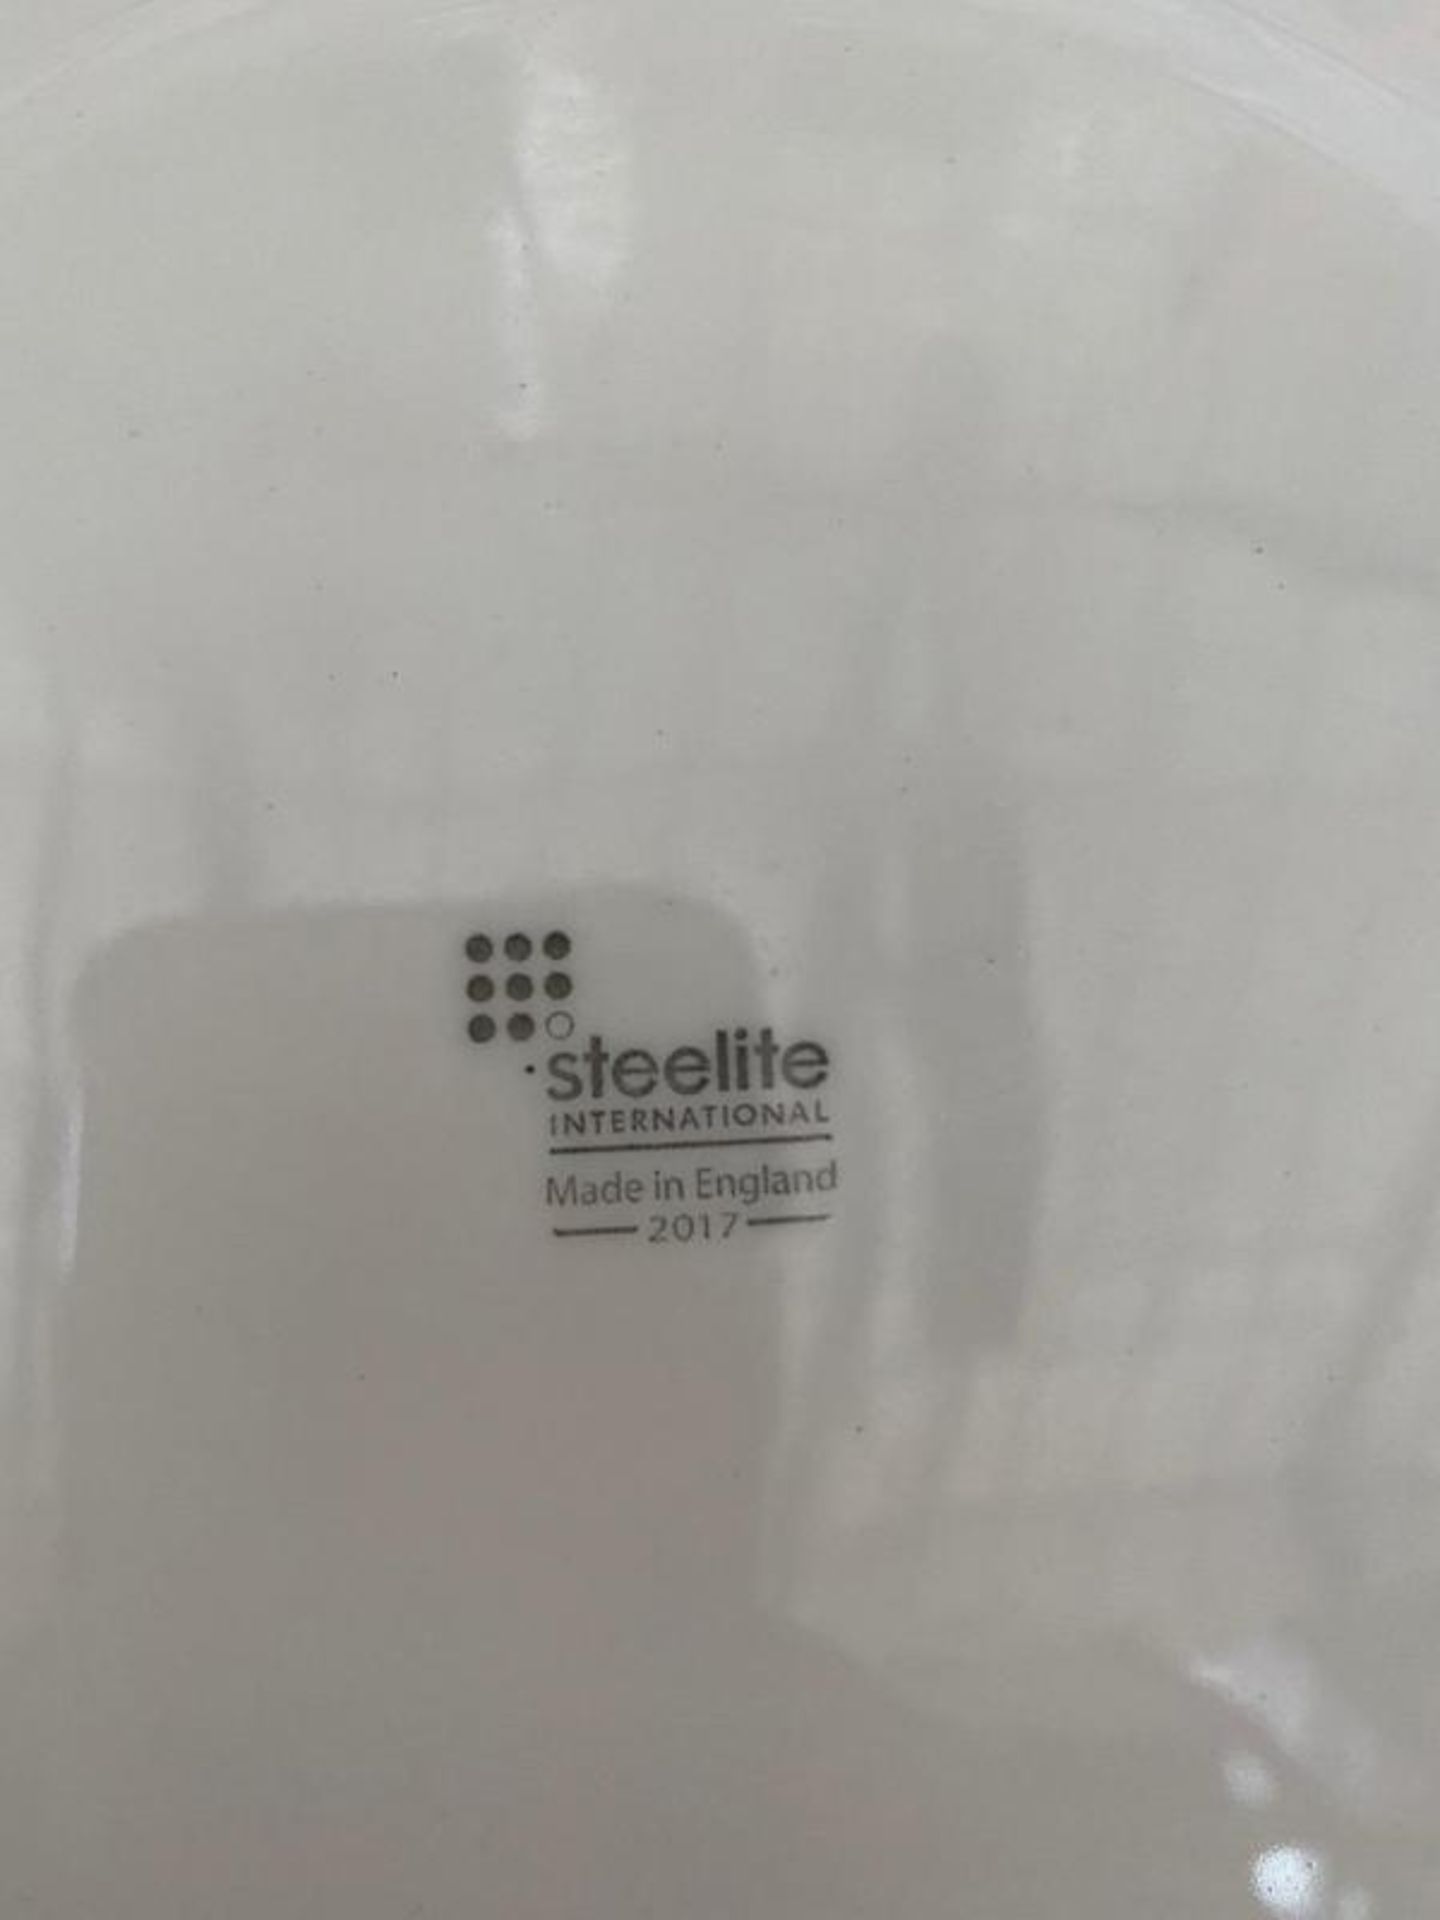 10 x Steelite Simplicity Commercial Pizza Plates in White - 315mm - Ref- V0246 - CL011 - 12341 - MC - Image 3 of 7